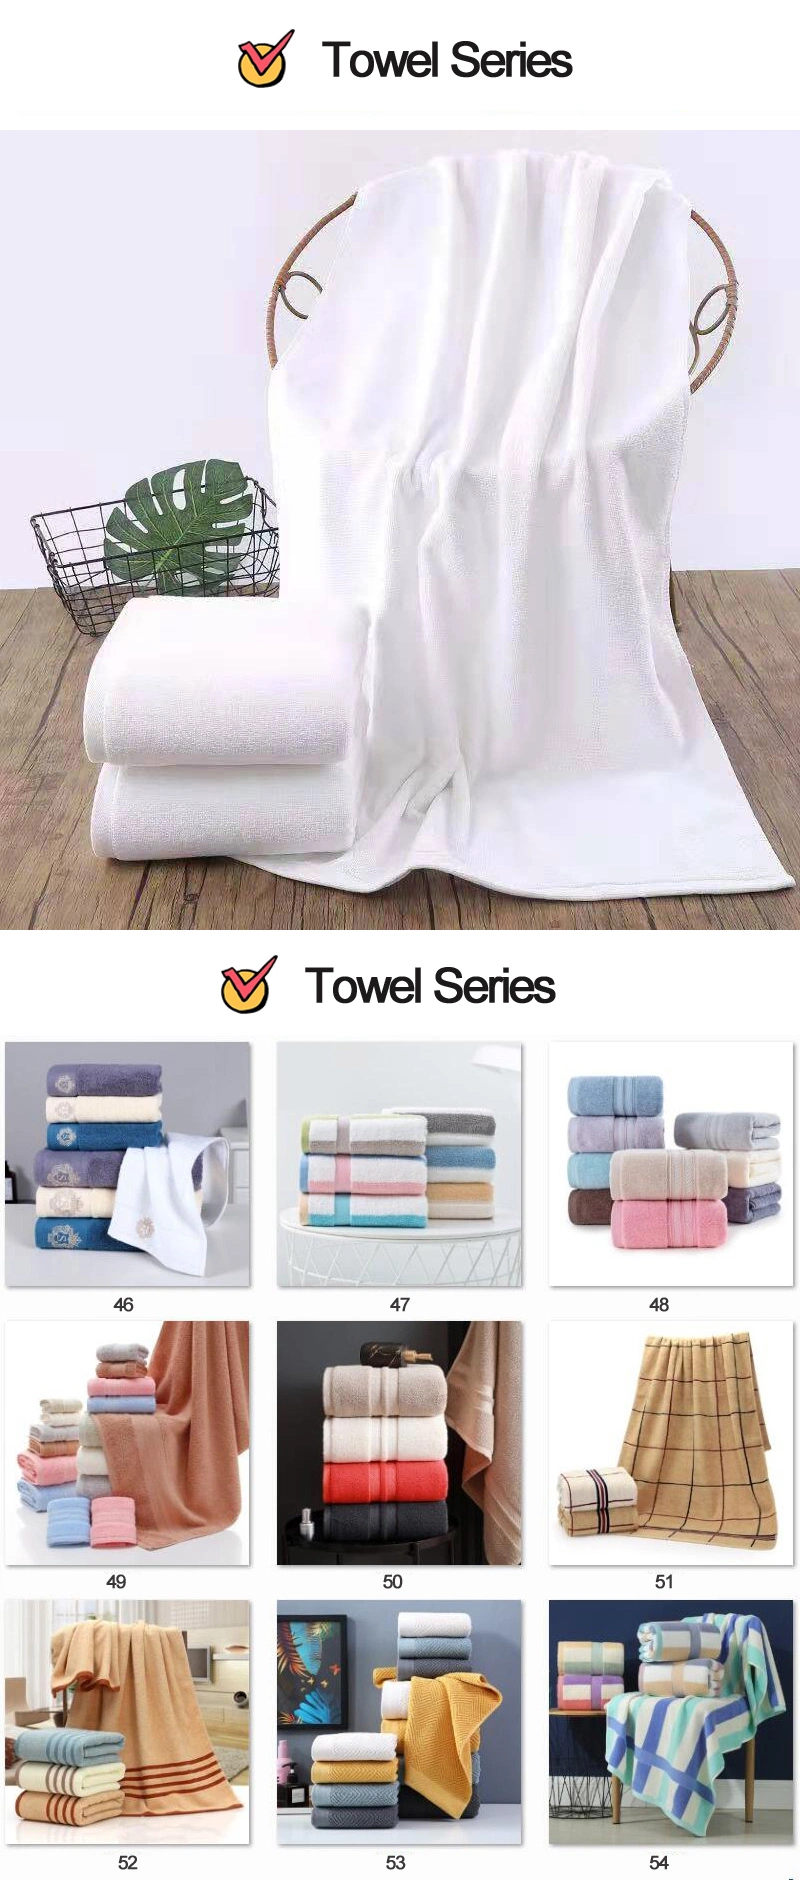 Luxury Cotton Disposable Hotel Bath, Hand, Face and Pool Cotton Towels Sets White